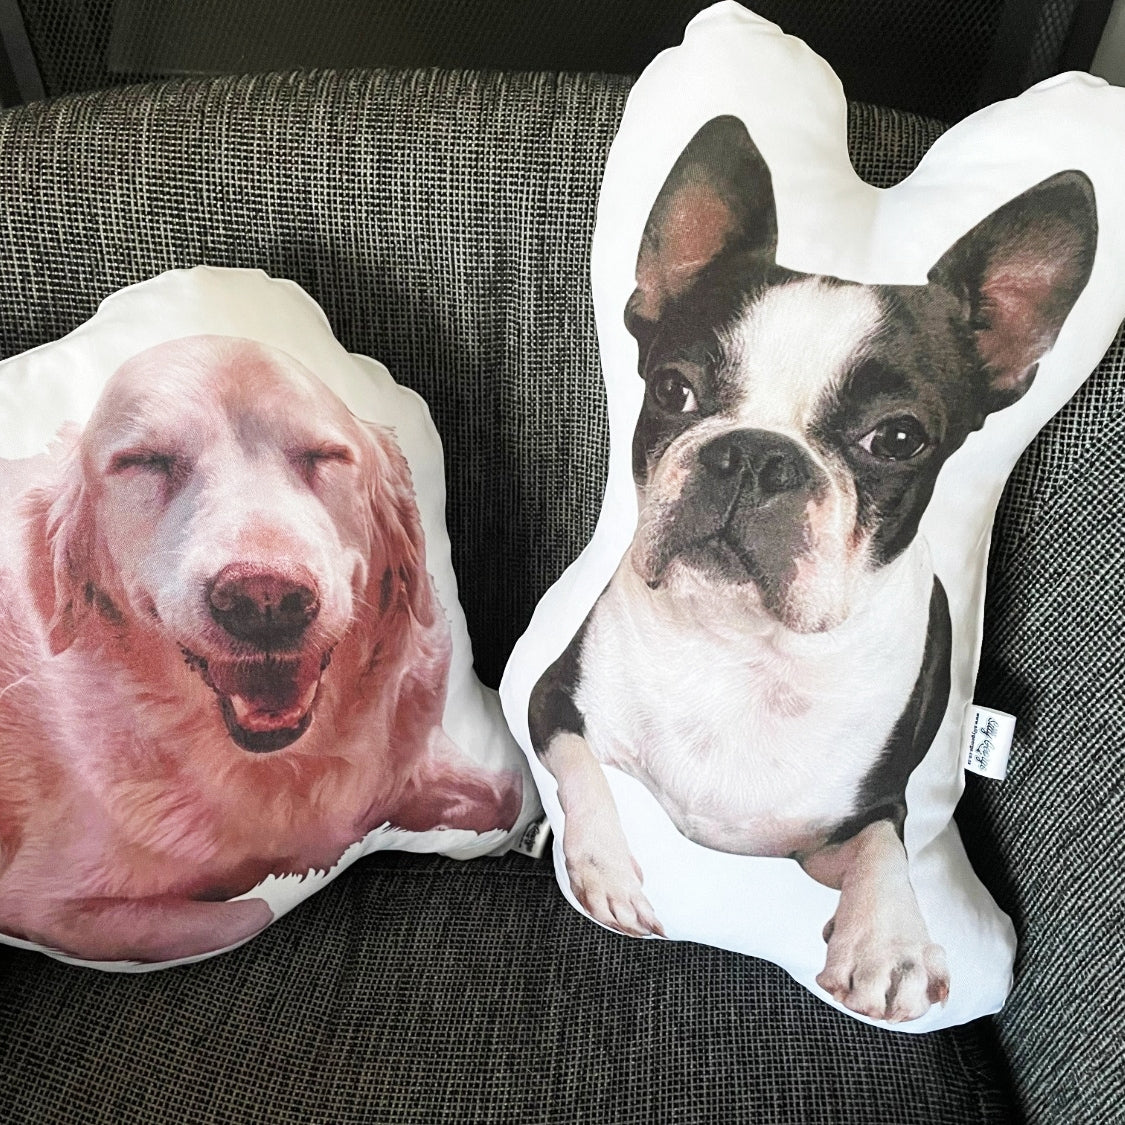 Silly George cut out custom pillows